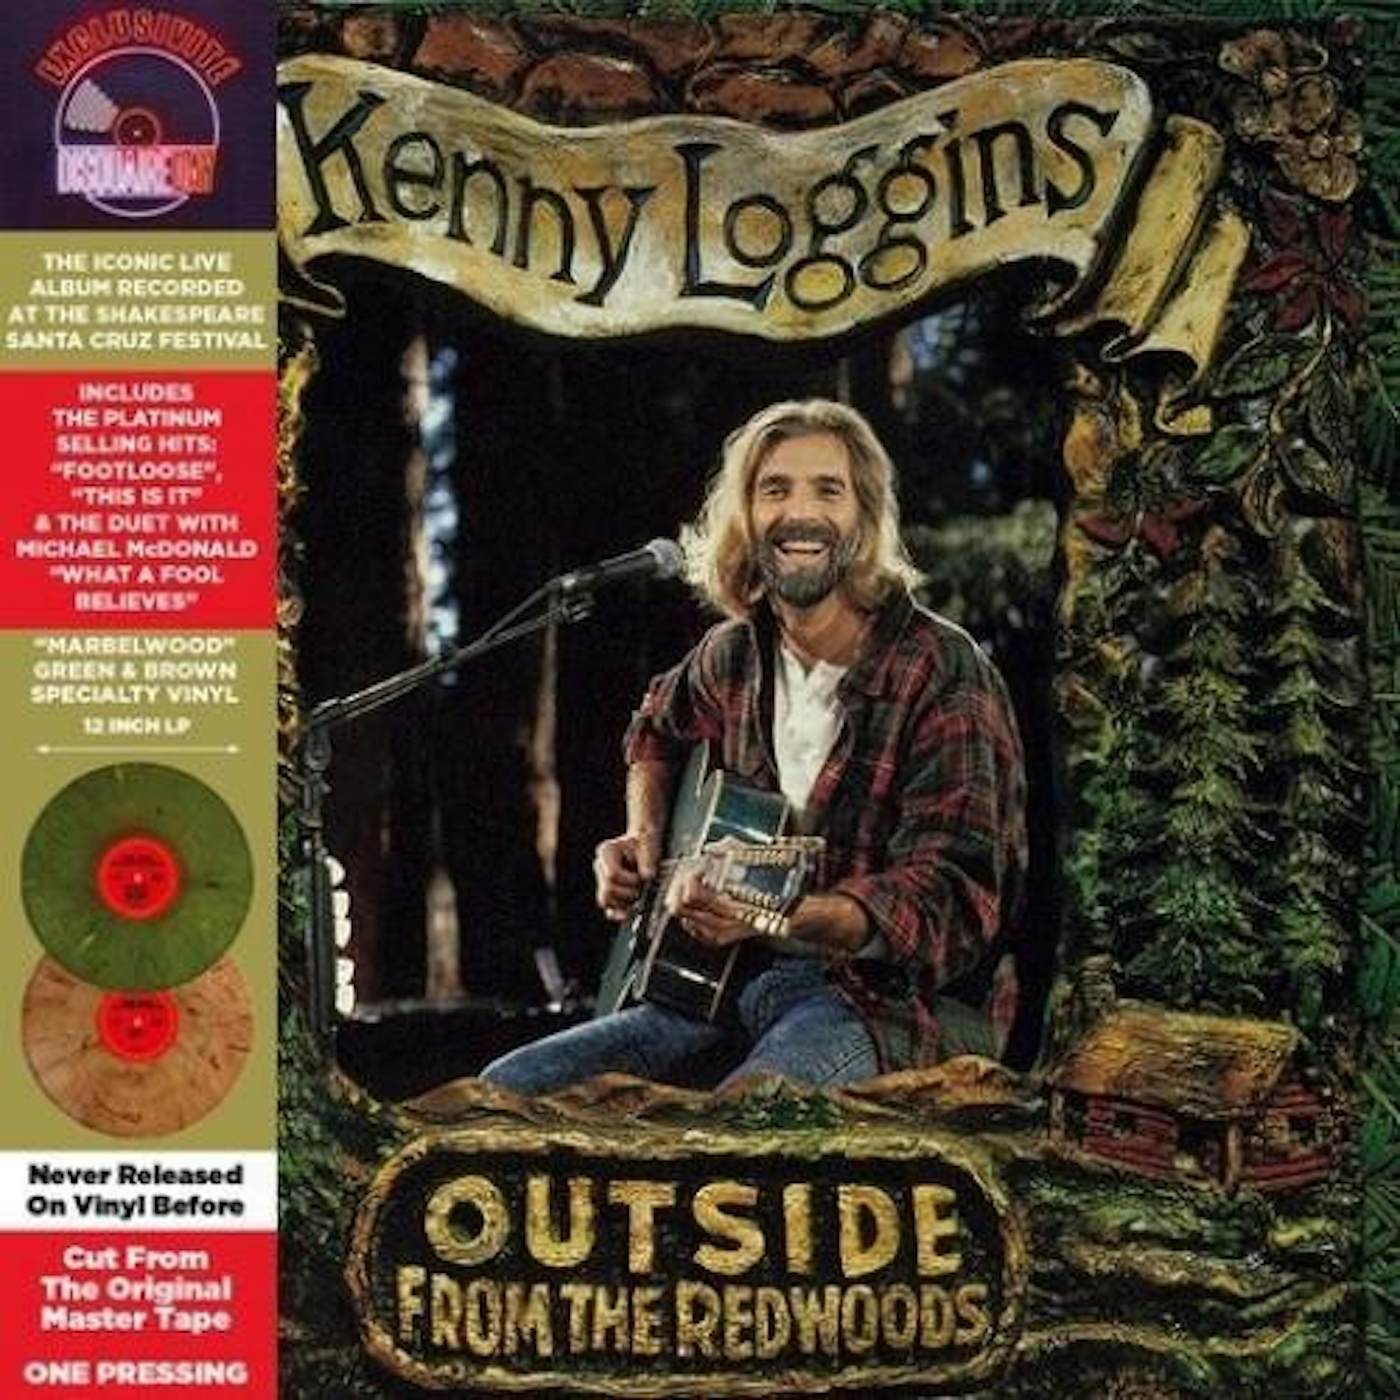 Kenny Loggins Outside From The Redwoods (Green & Brown) Vinyl Record